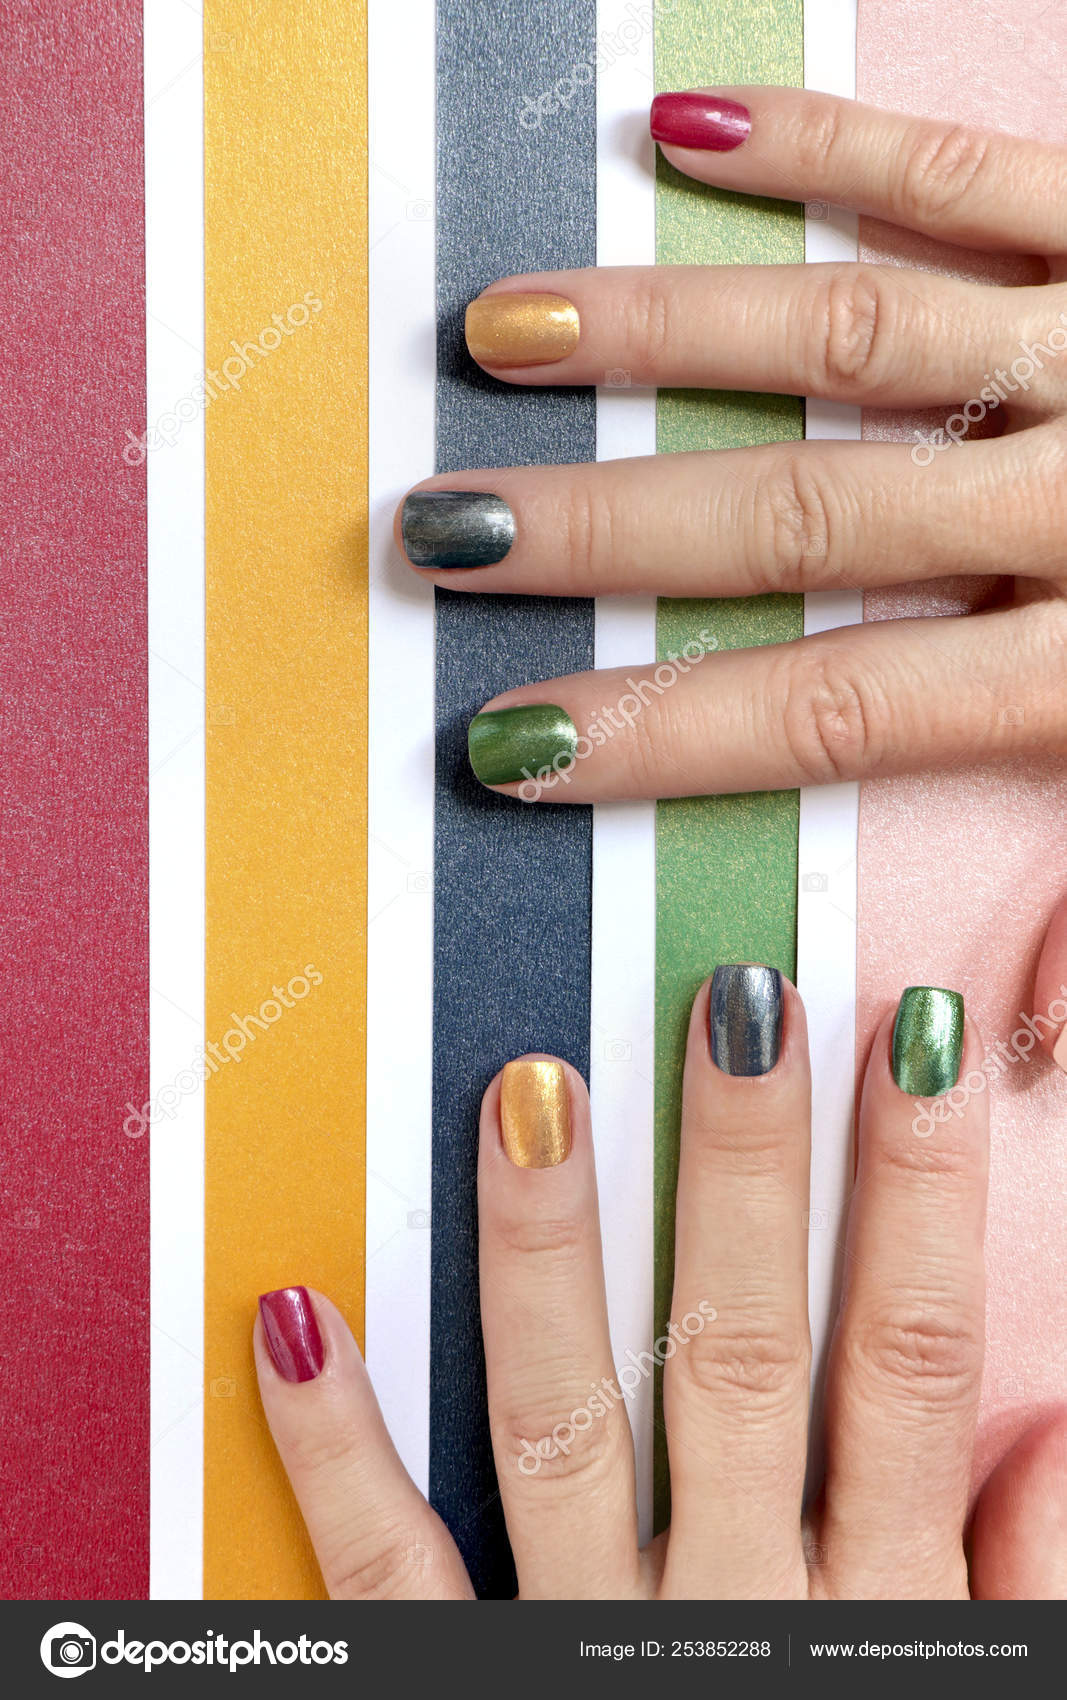 18 Birthday Manicure Ideas That Call For a Celebration